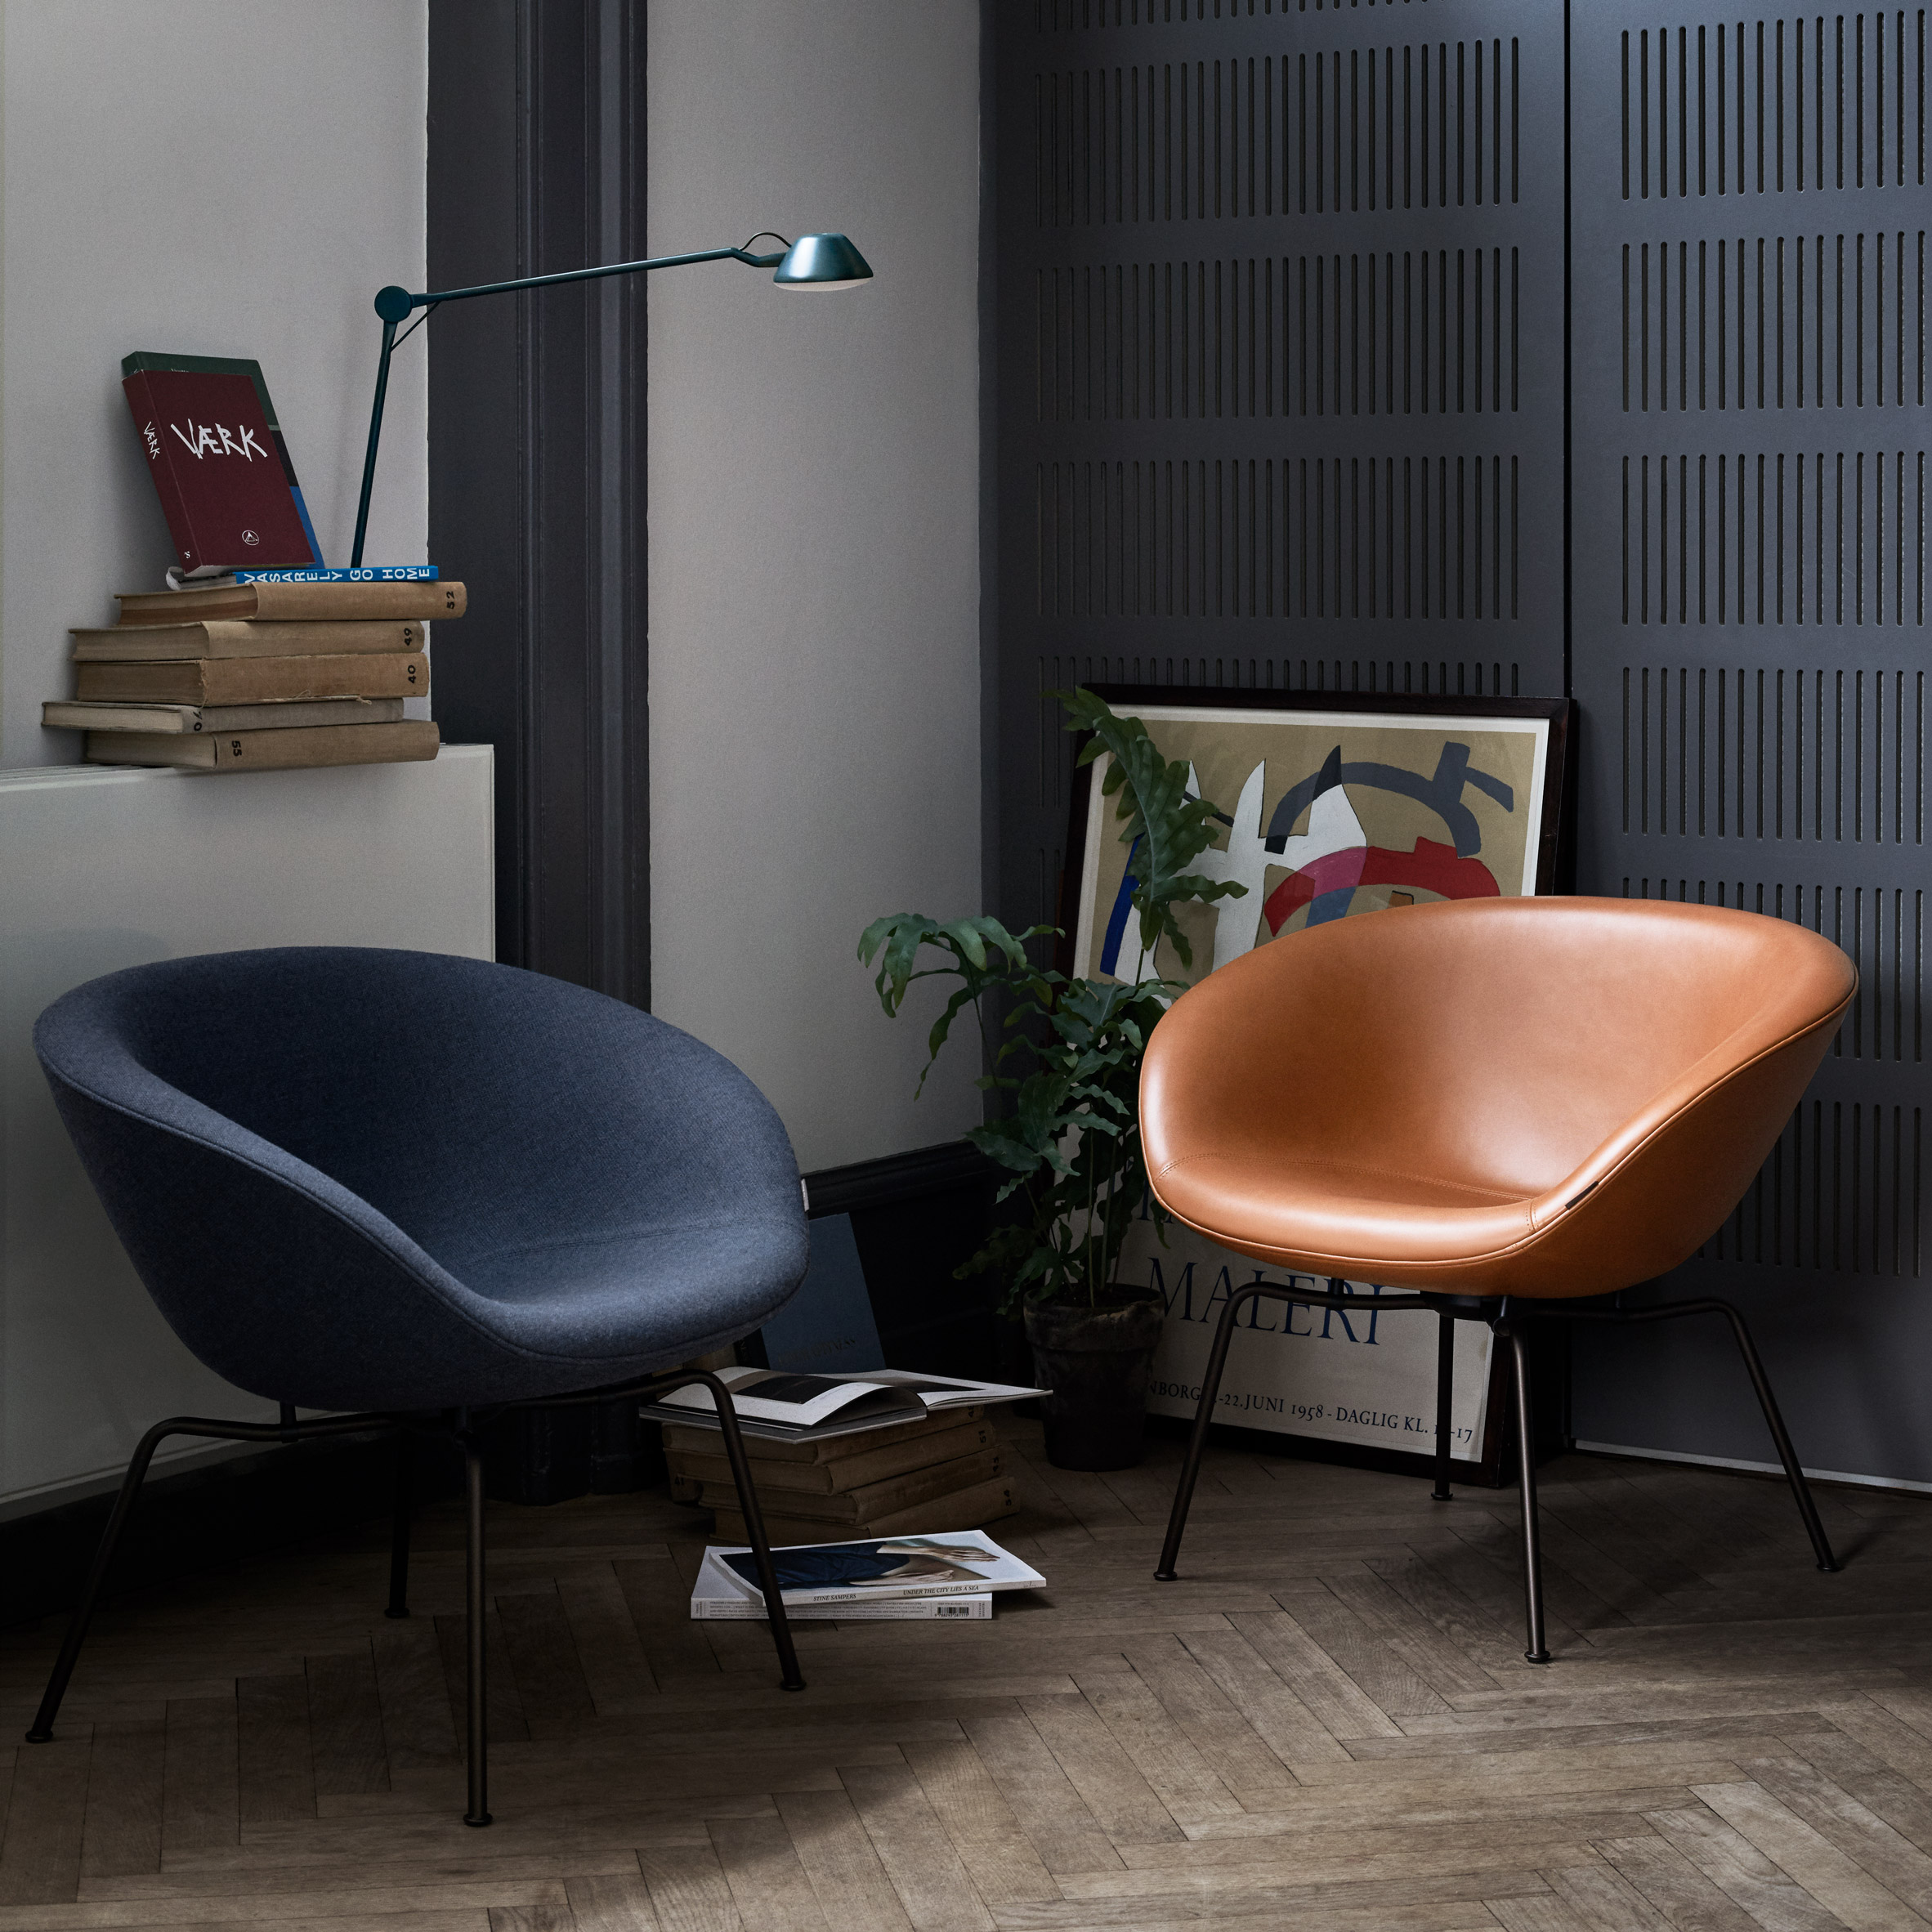 Pot Chair by Arne Jacobsen, 1959 - Mid-century furniture designs relaunched at Stockholm Design Week